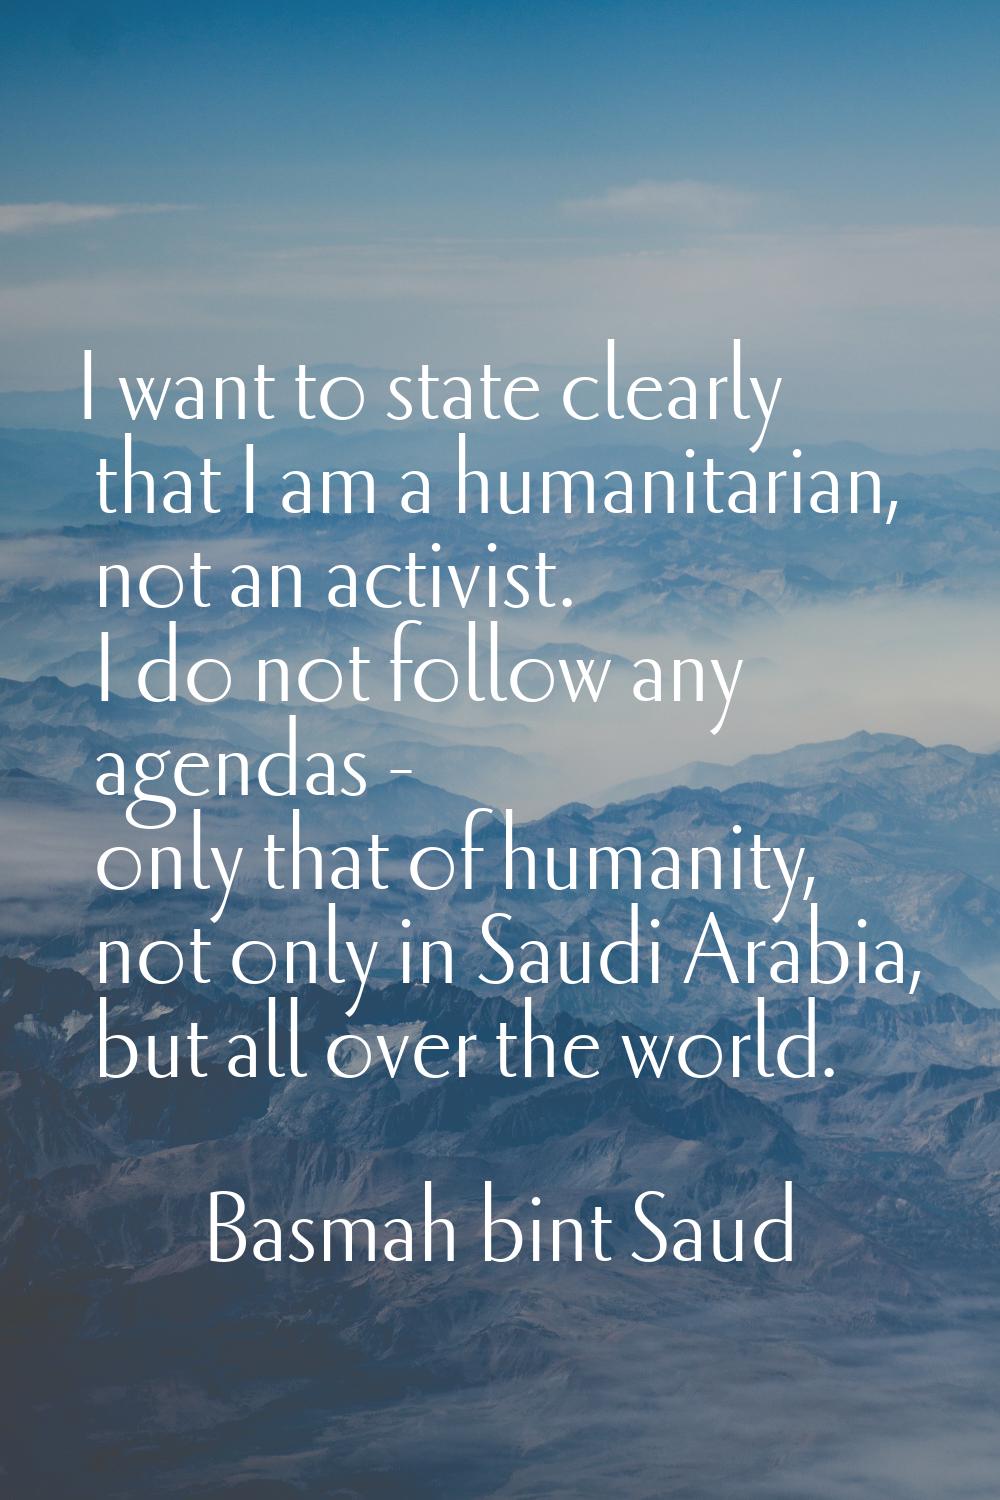 I want to state clearly that I am a humanitarian, not an activist. I do not follow any agendas - on